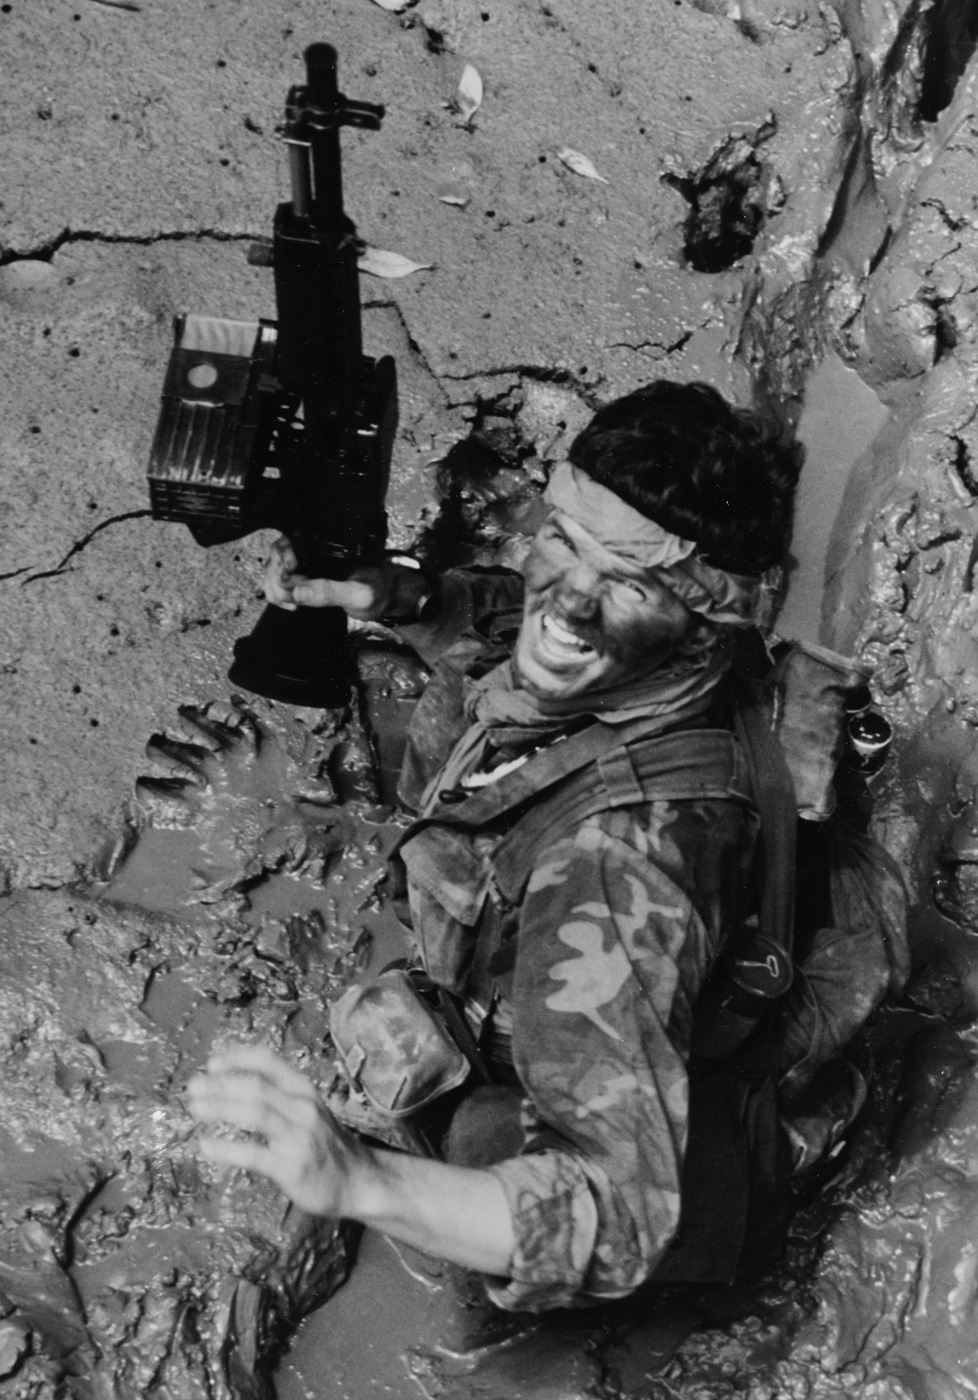 This photo shows a Navy SEAL carrying a Stoner 63 through mud on the banks of a river in Vietnam.